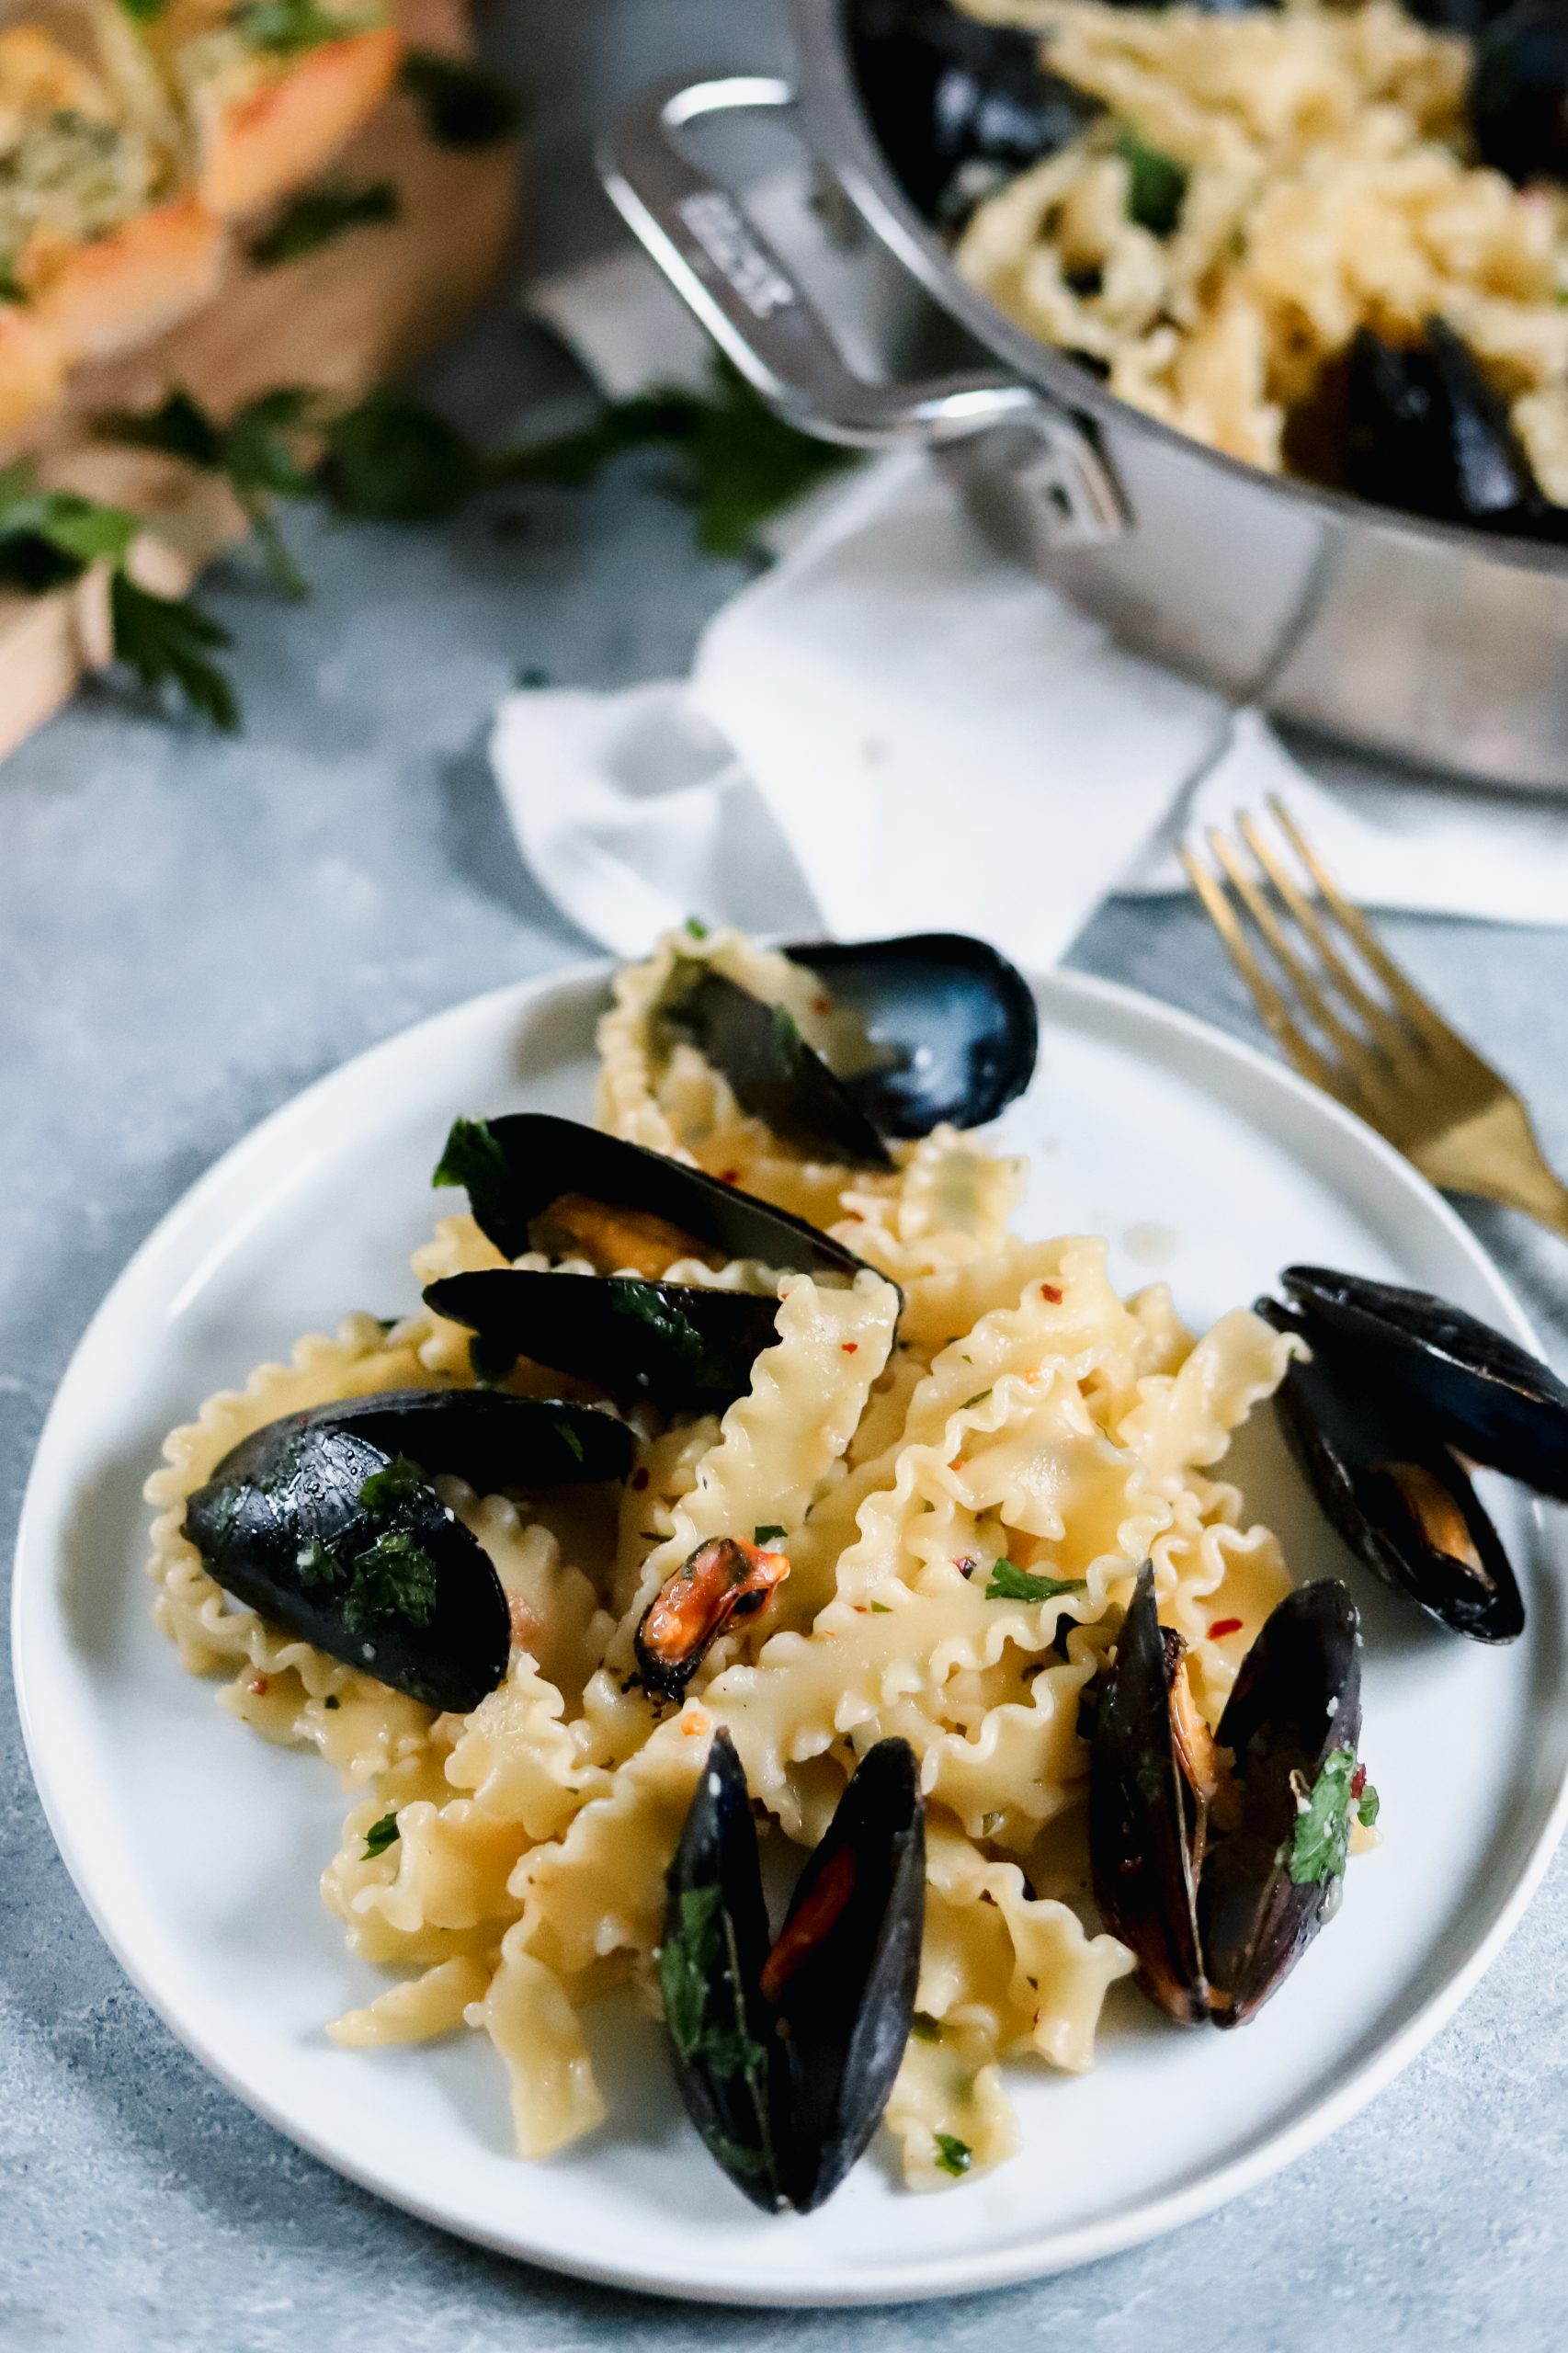 Pasta with Mussels in White Wine Garlic Sauce